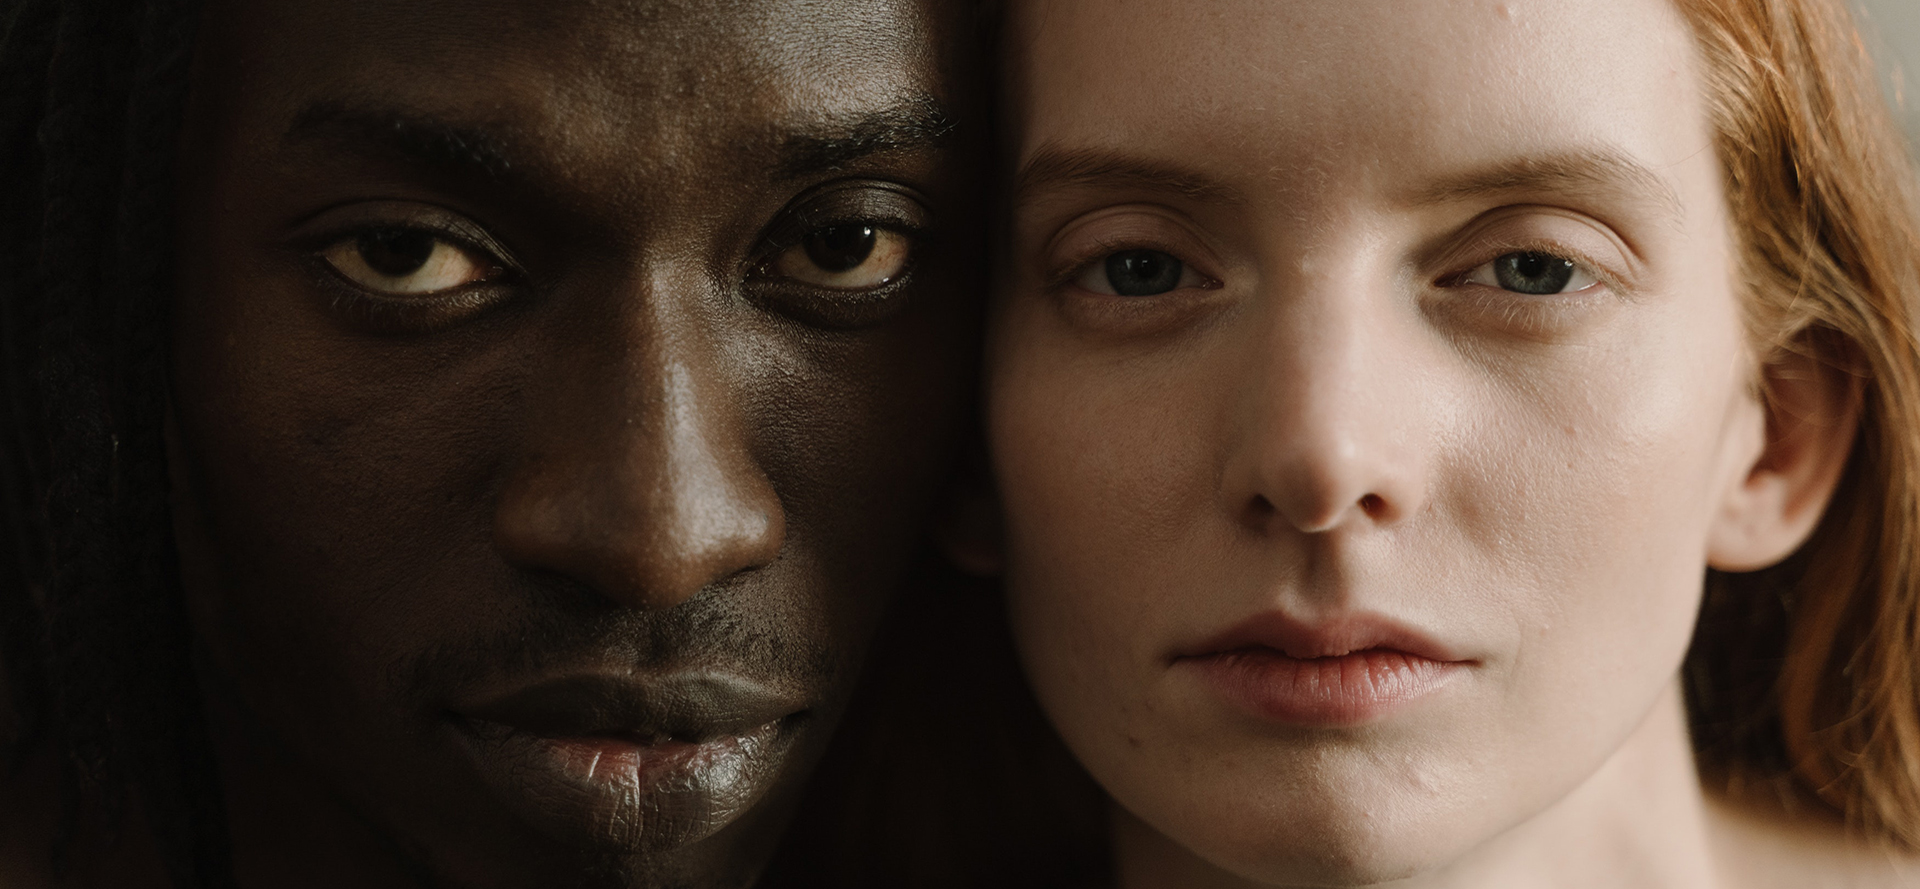 A face to face portrait of a black man and a white woman.